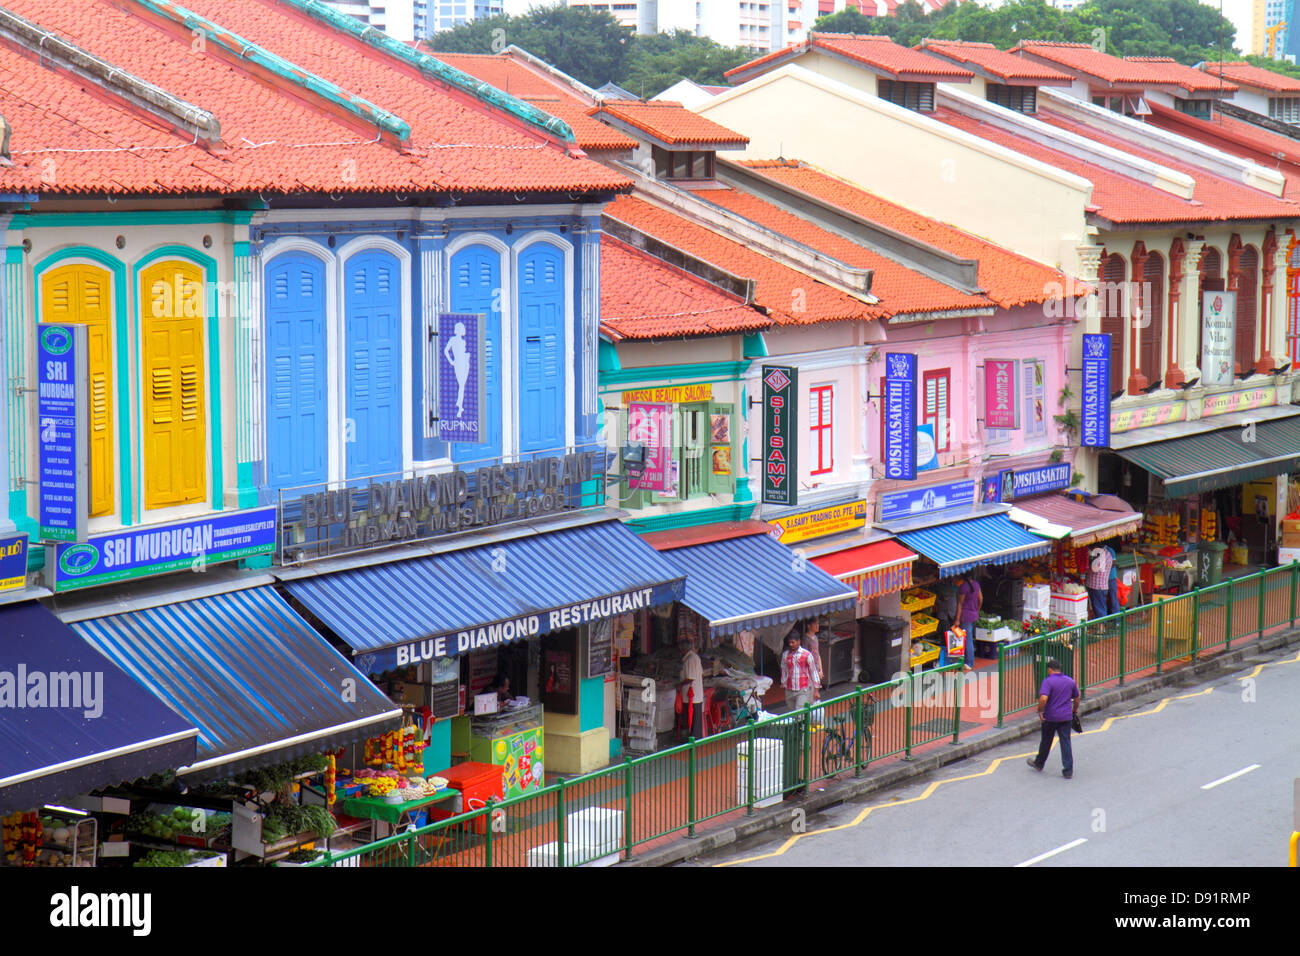 Singapore Little India,Buffalo Road,two-story,storey,shophouses,shophouse,red clay tile roof,businesses,district,Sing130206046 Stock Photo